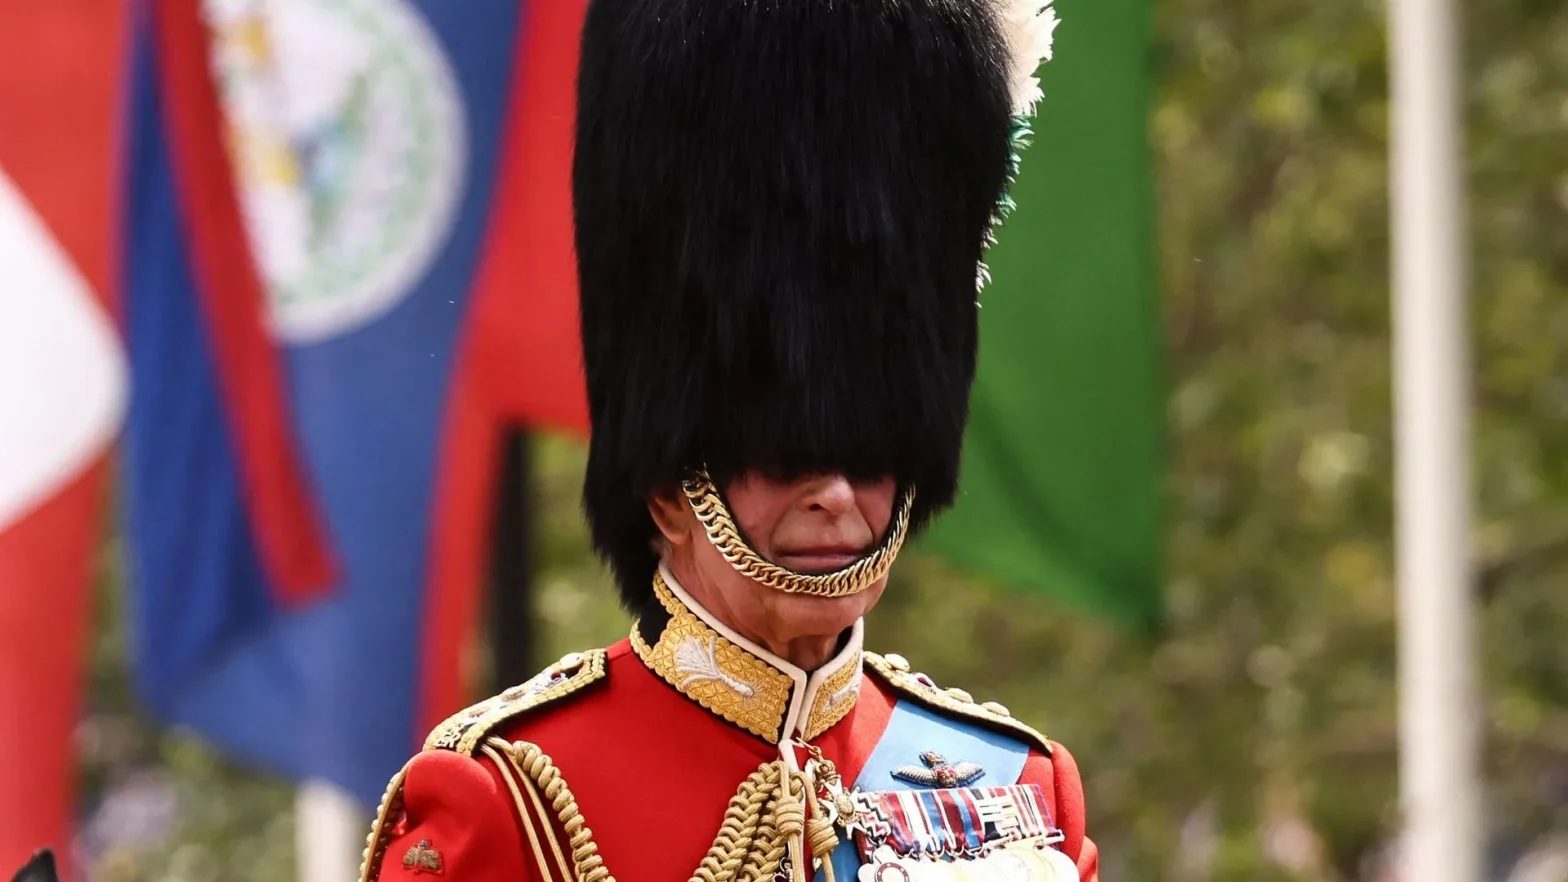 What did the royal family wear to King Charles’ birthday parade?